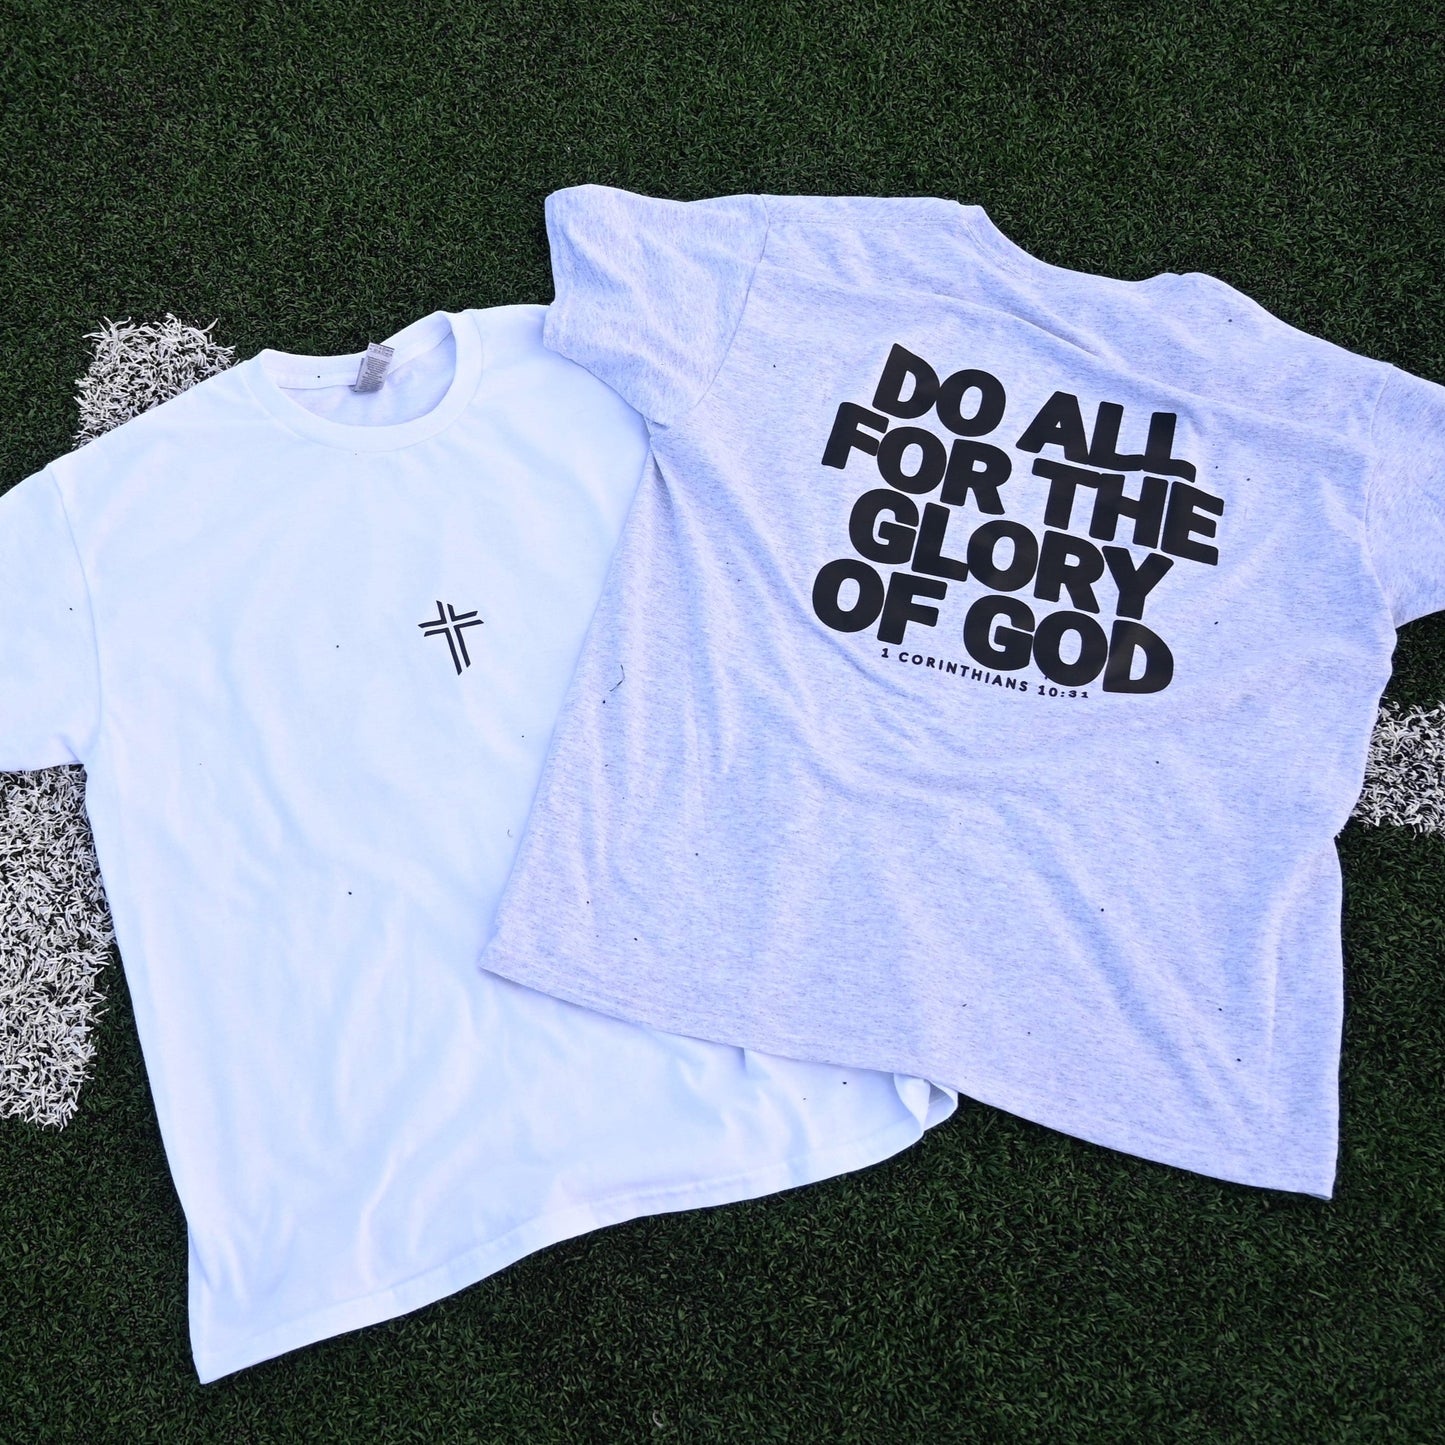 DO ALL FOR THE GLORY OF GOD Cotton-Blend Shirt